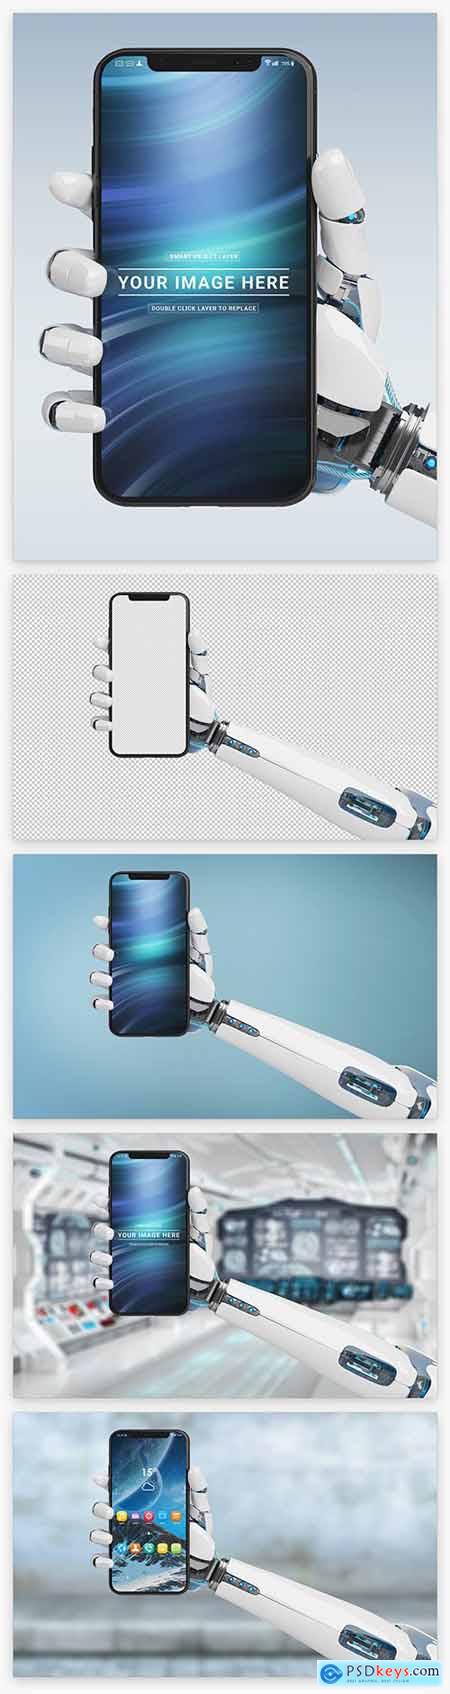 Isolated Smartphone in Robot Hand Mockup 220288620